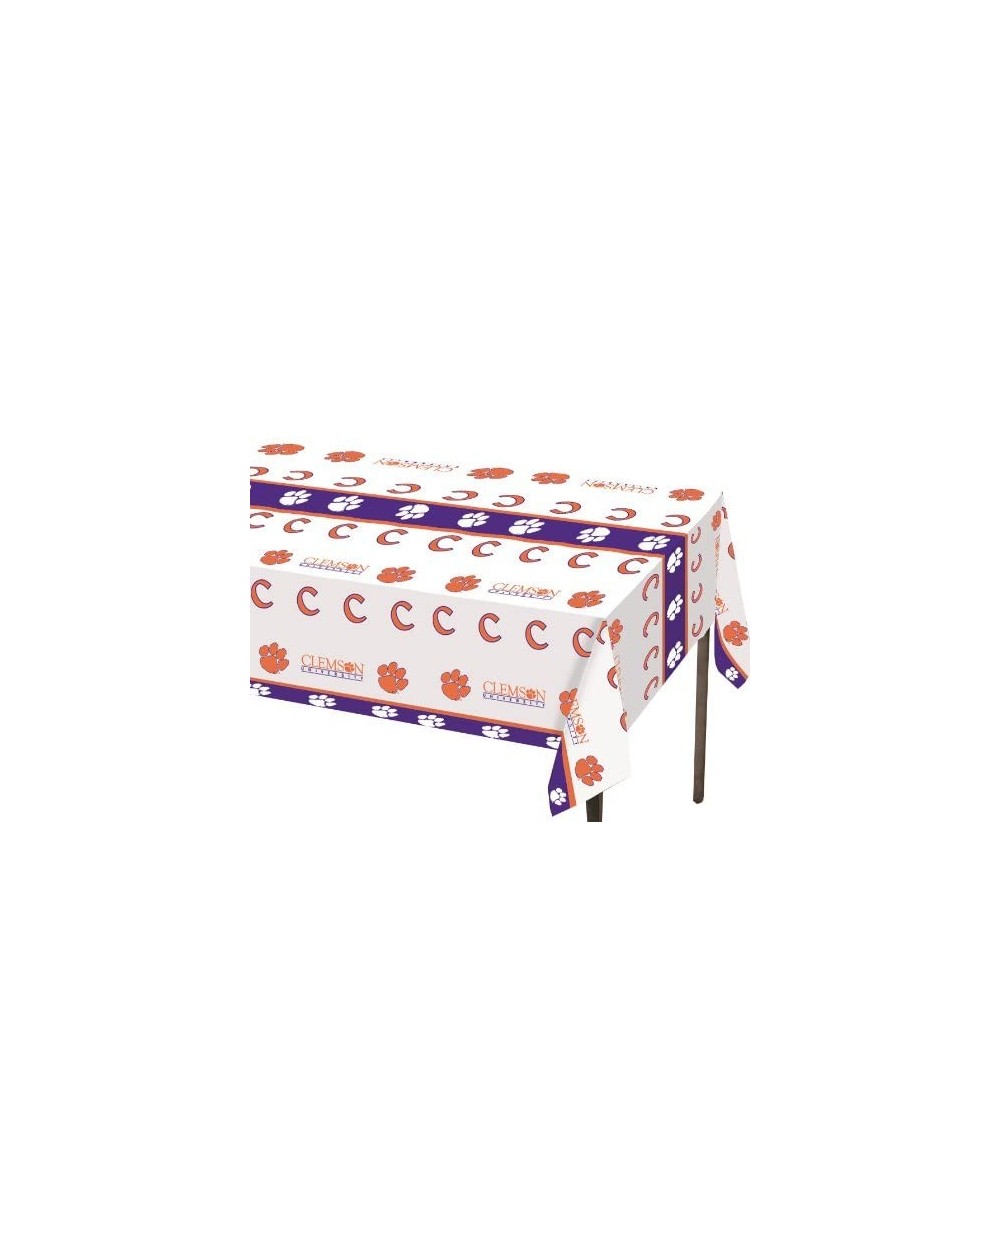 Tablecovers Clemson Tigers Plastic Table Cover- 54"x108" - Paper Bowl- 20oz - CE1193BLH01 $7.49